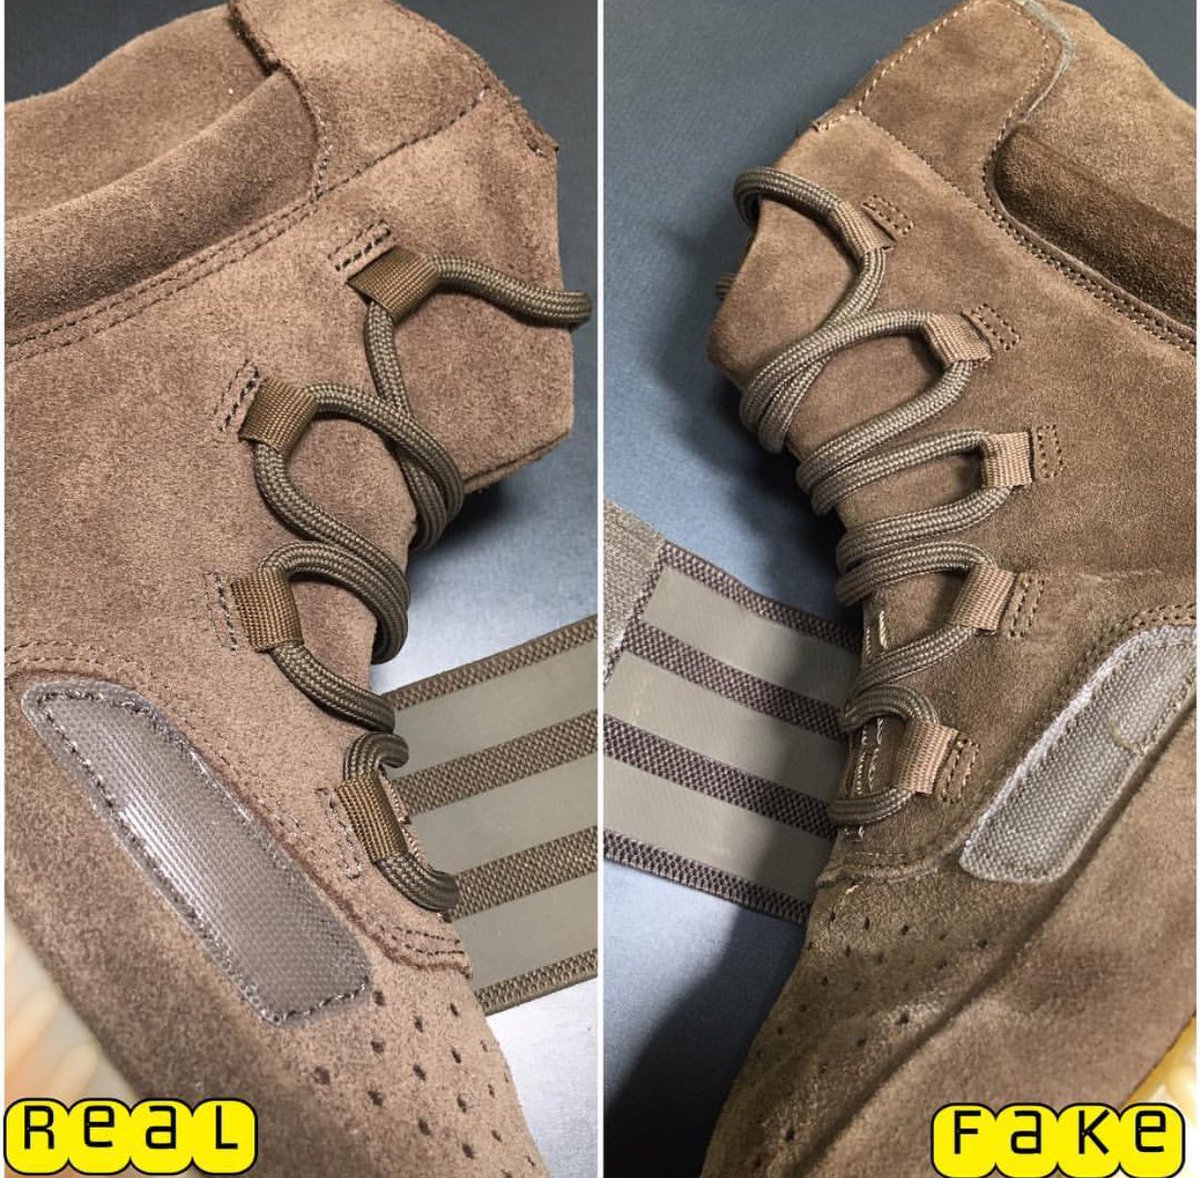 yeezy boost 750 real vs fake